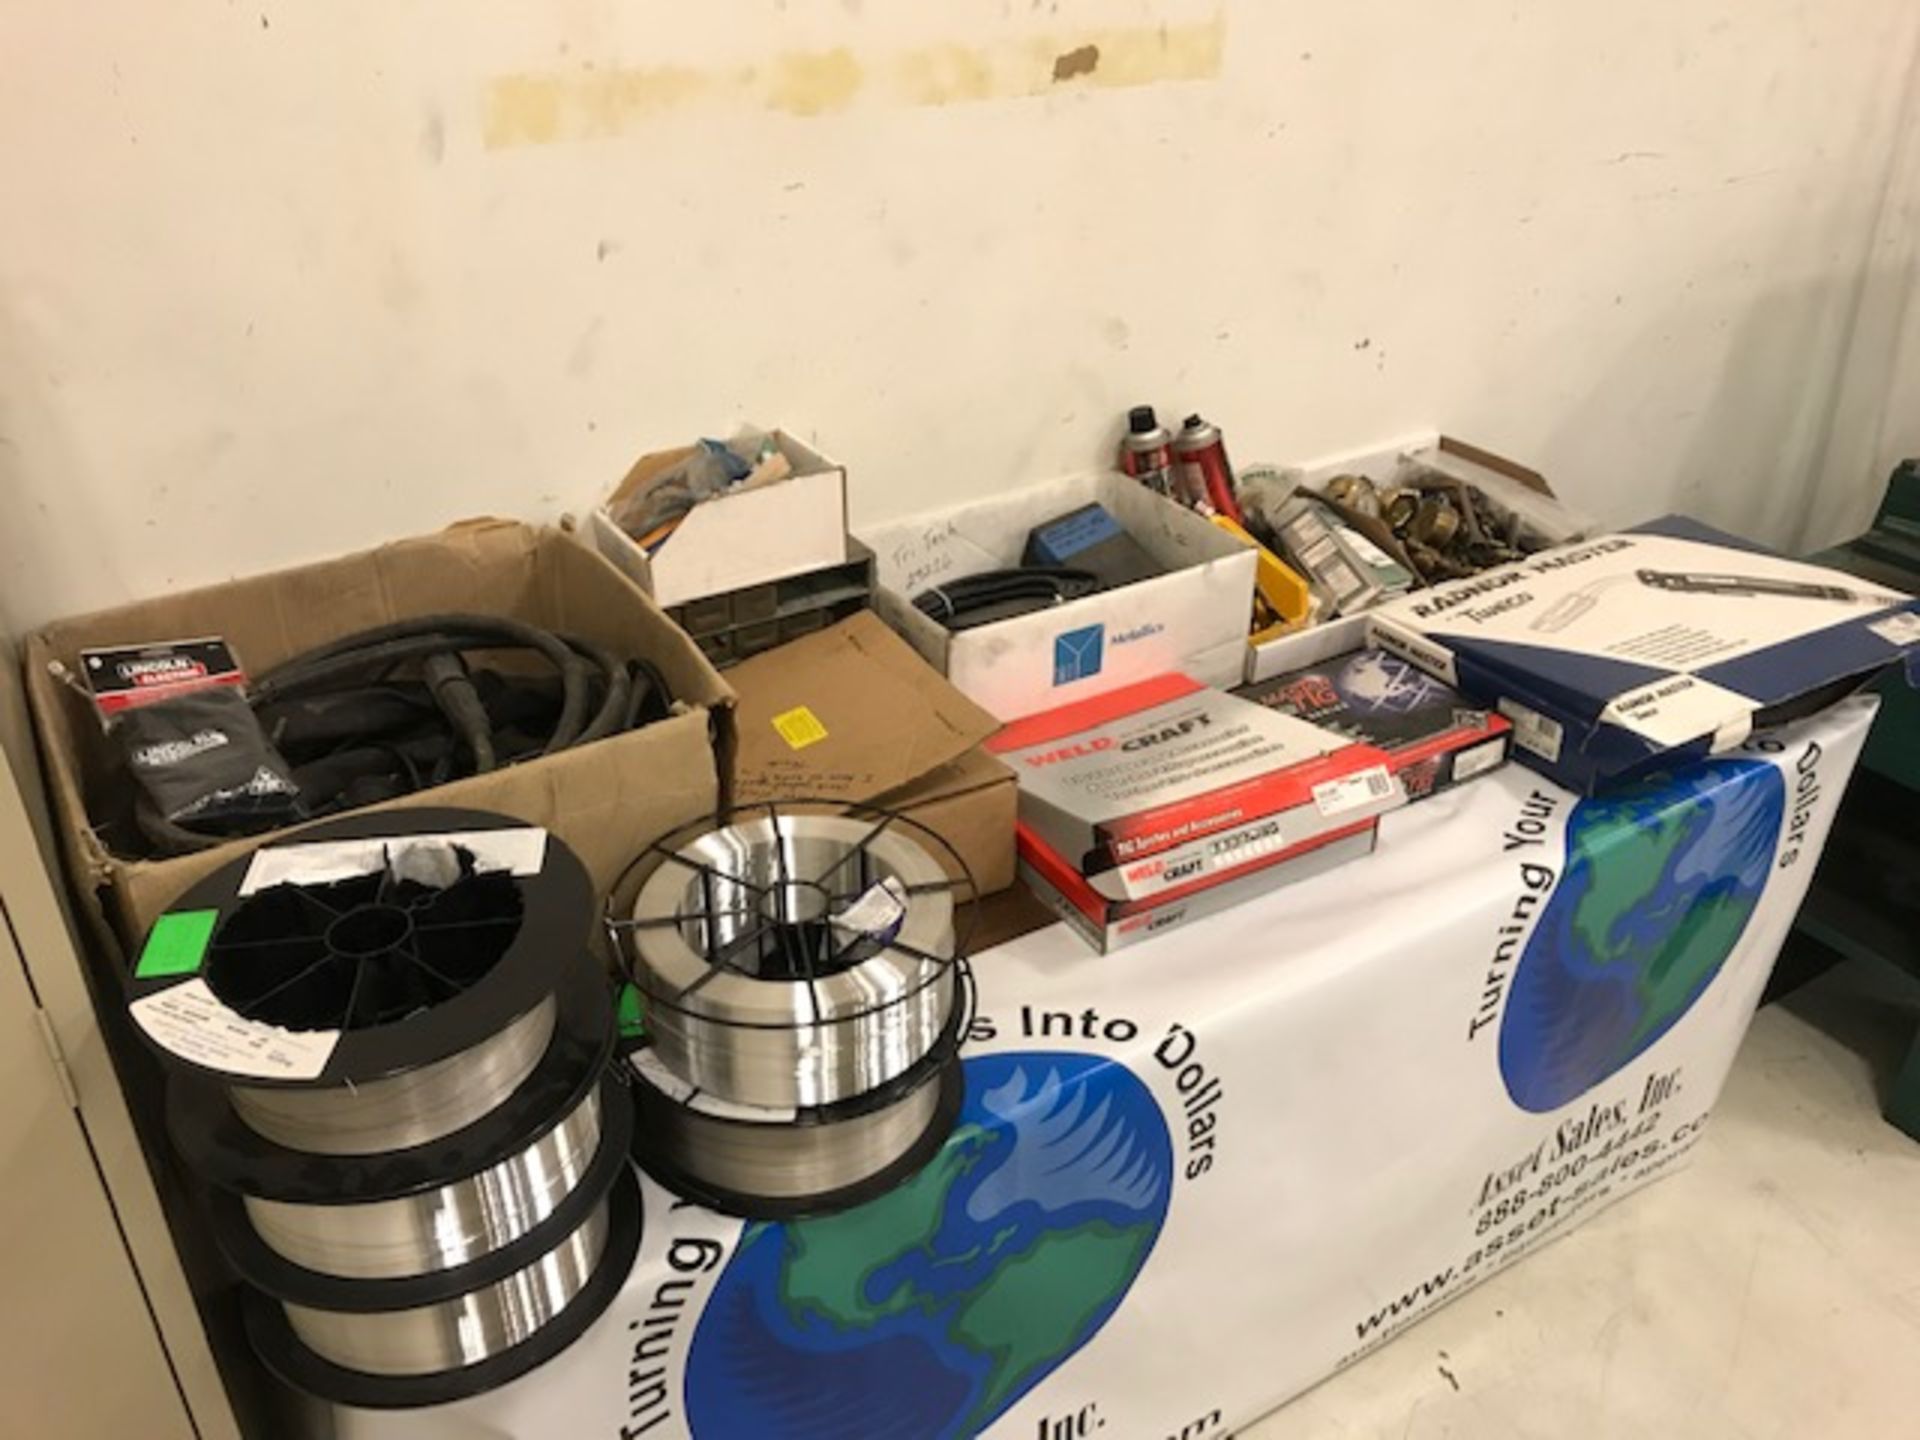 Welding Supplies including Wire, Guns, Leads